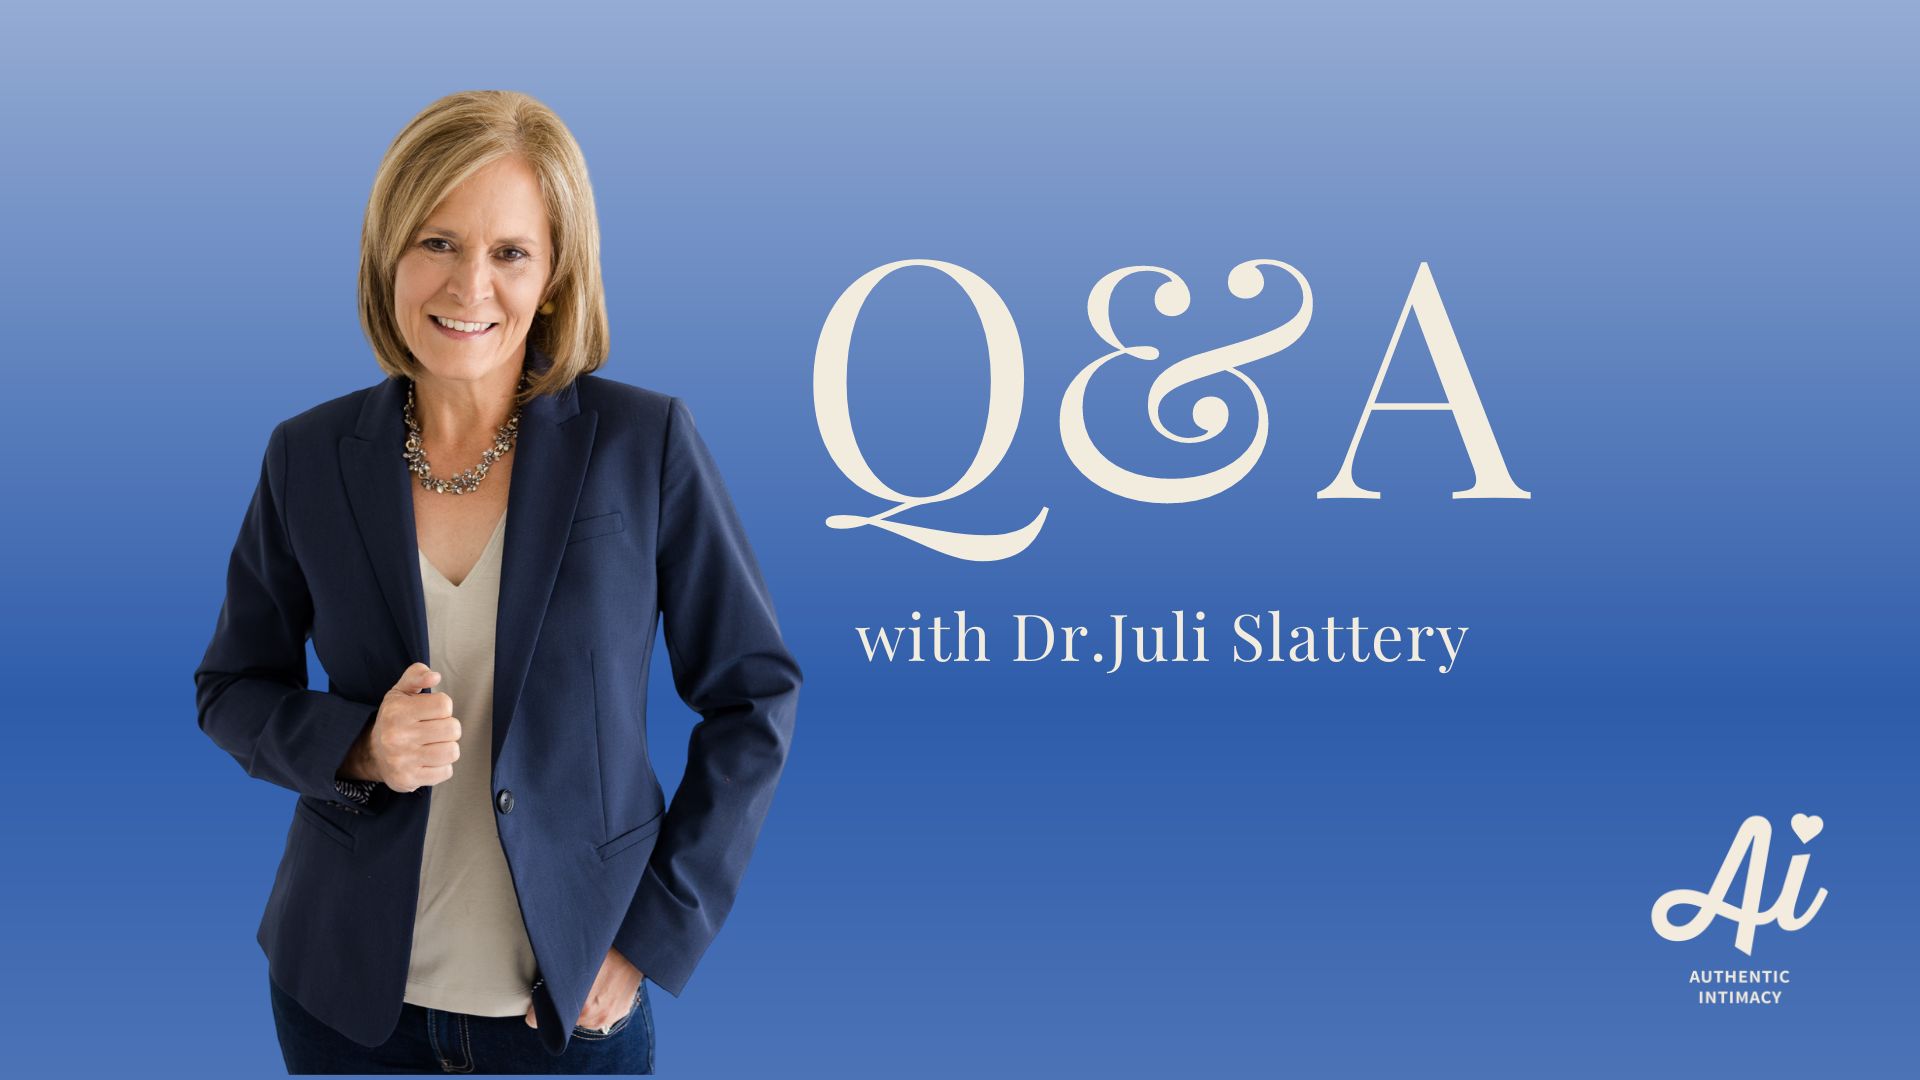 Q&A: What Does God Say About Divorce?